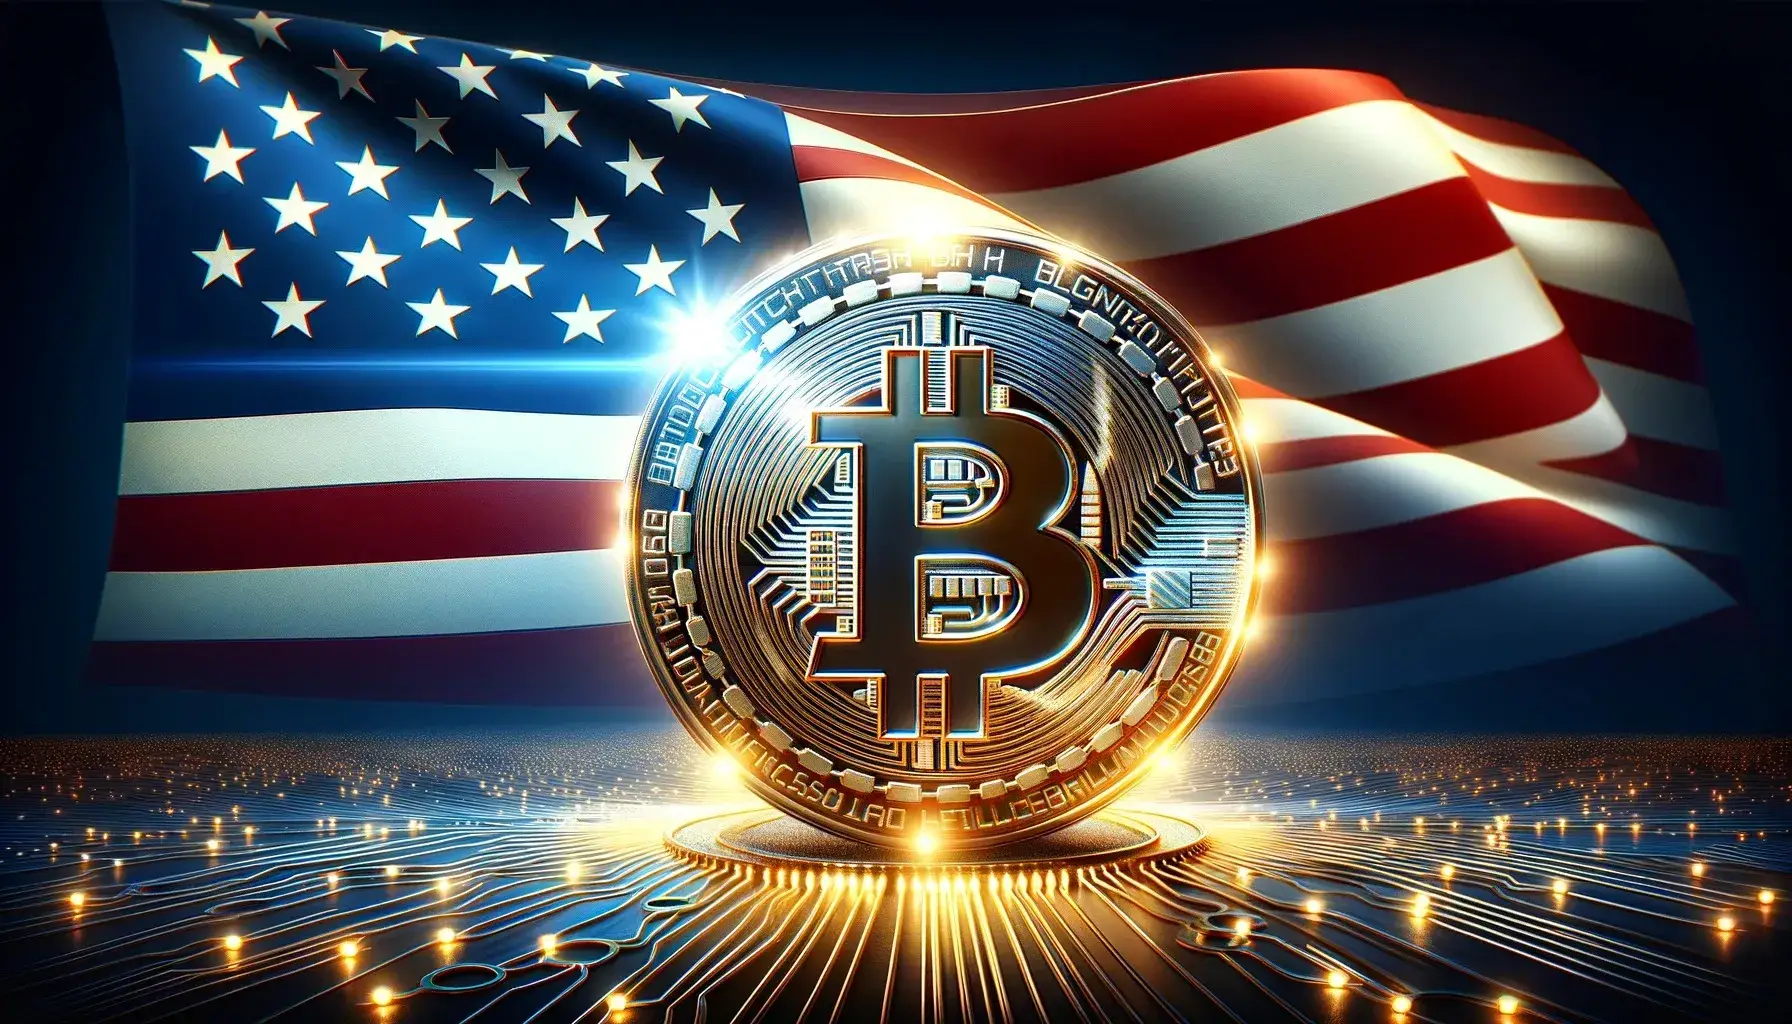 Bitcoin Miner Riot Platforms Sues US Government Over Energy Data Collection